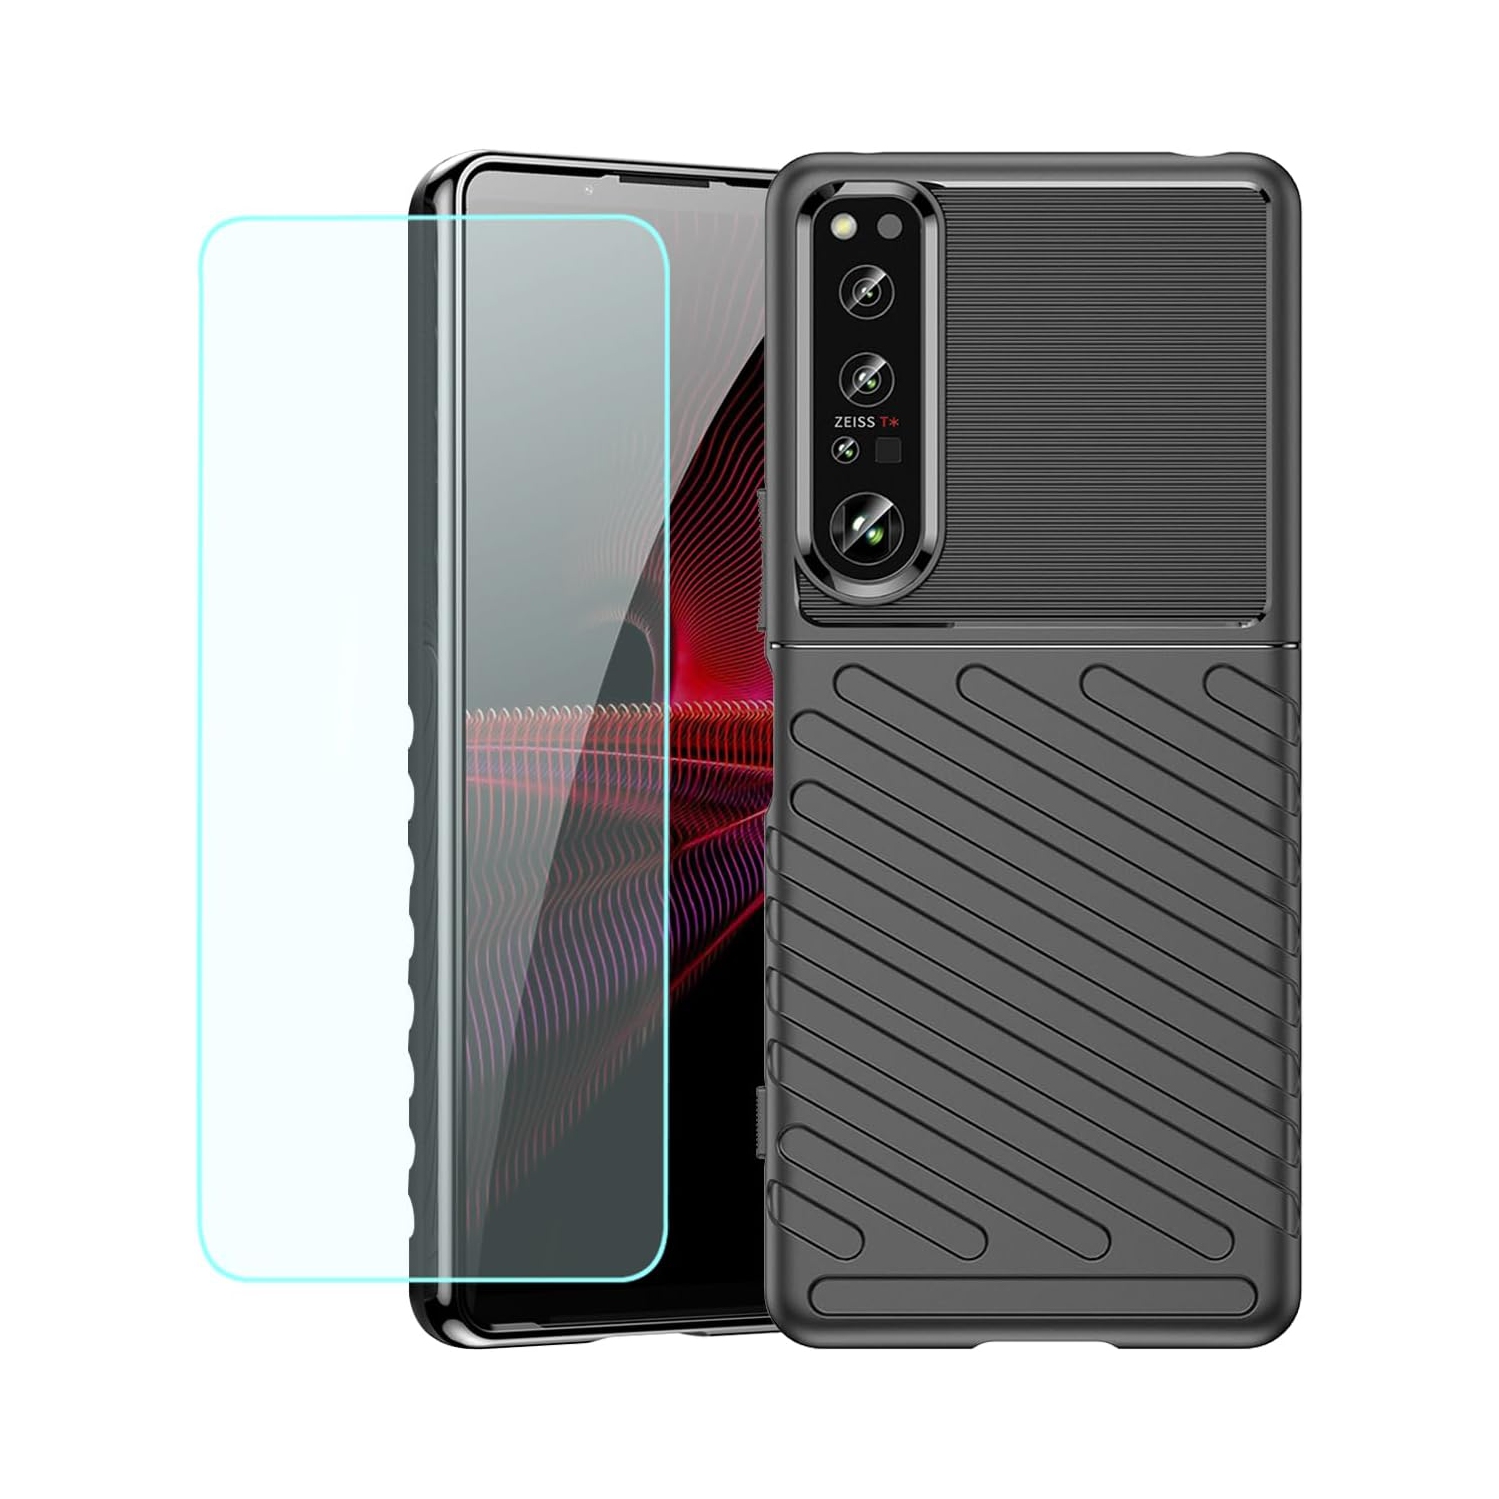 Phone Case for Xperia 1 IV 5G Case, Sony 1 IV XQ-CT72 Case with Screen Protector, Carbon Fiber Anti-Scratch